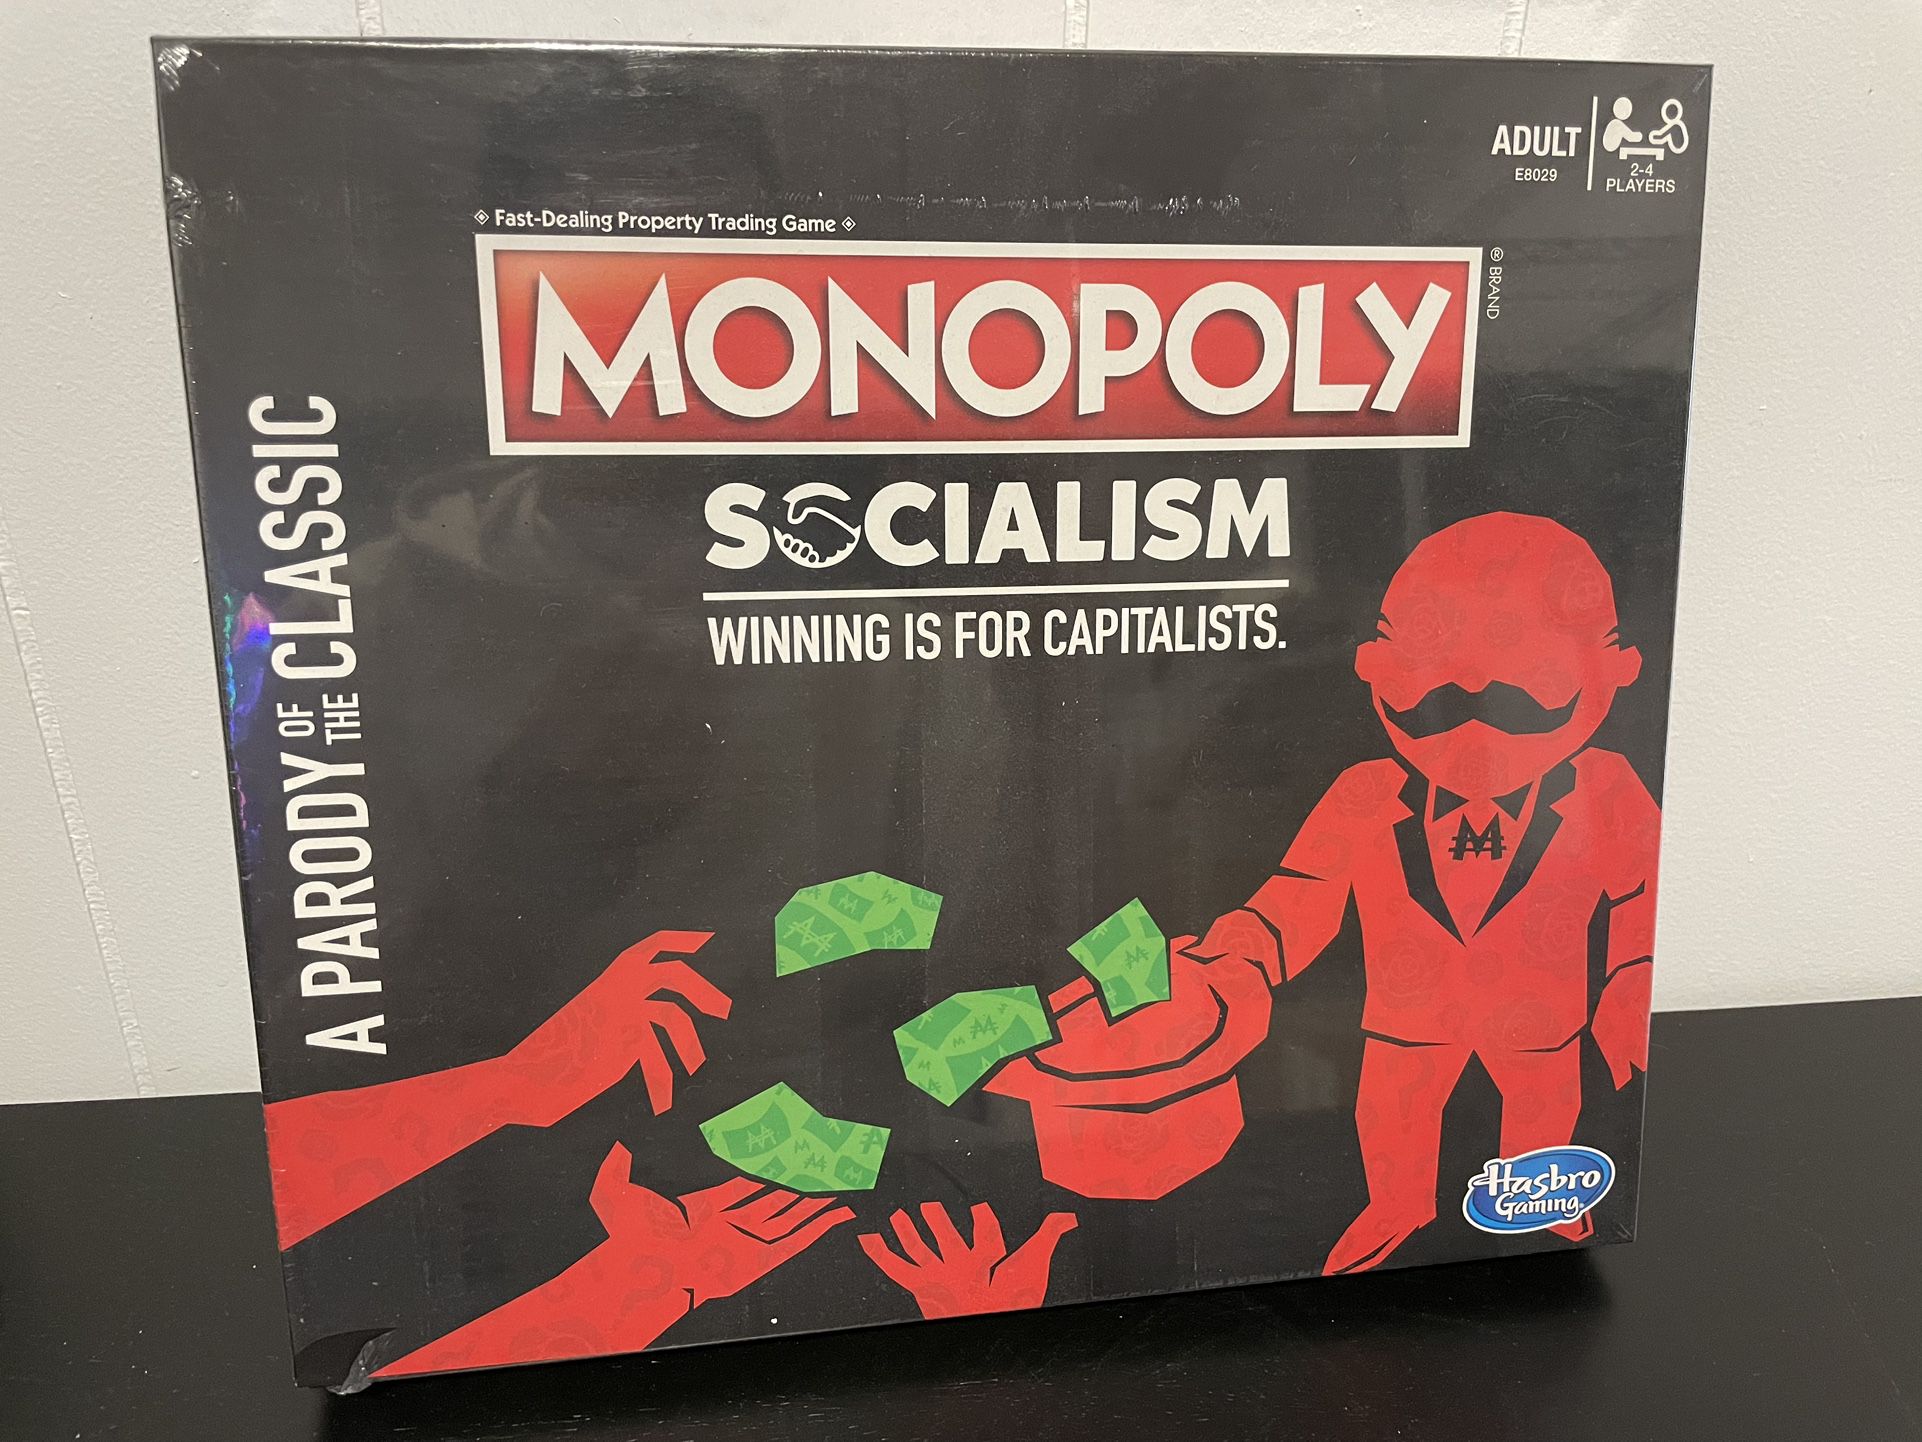 Monopoly Socialism 2018 Hasbro ‘Winning is for Capitalists’ Parody Game Complete